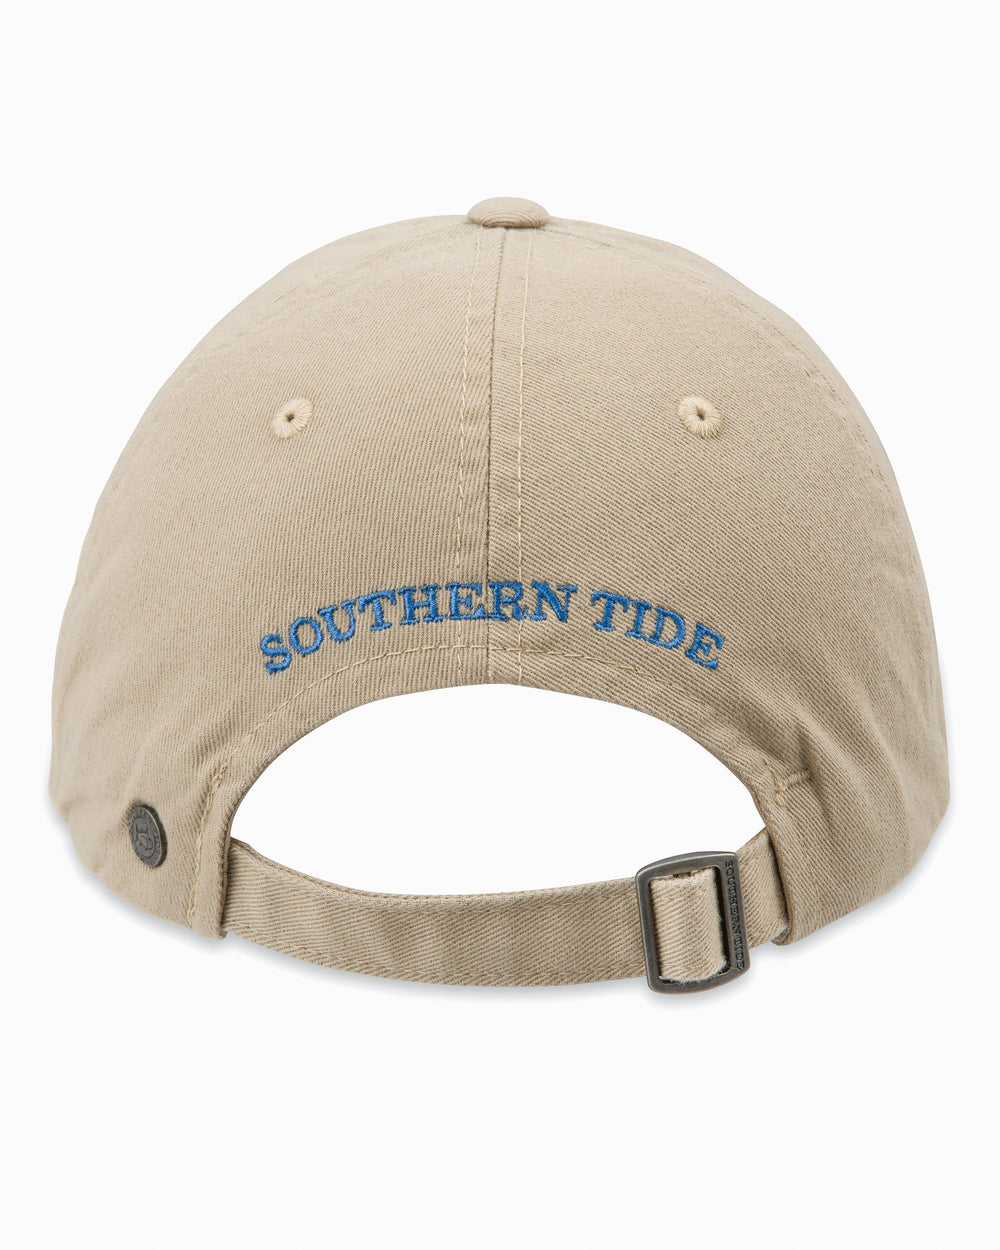 The back of the Skipjack Hat by Southern Tide - Khaki